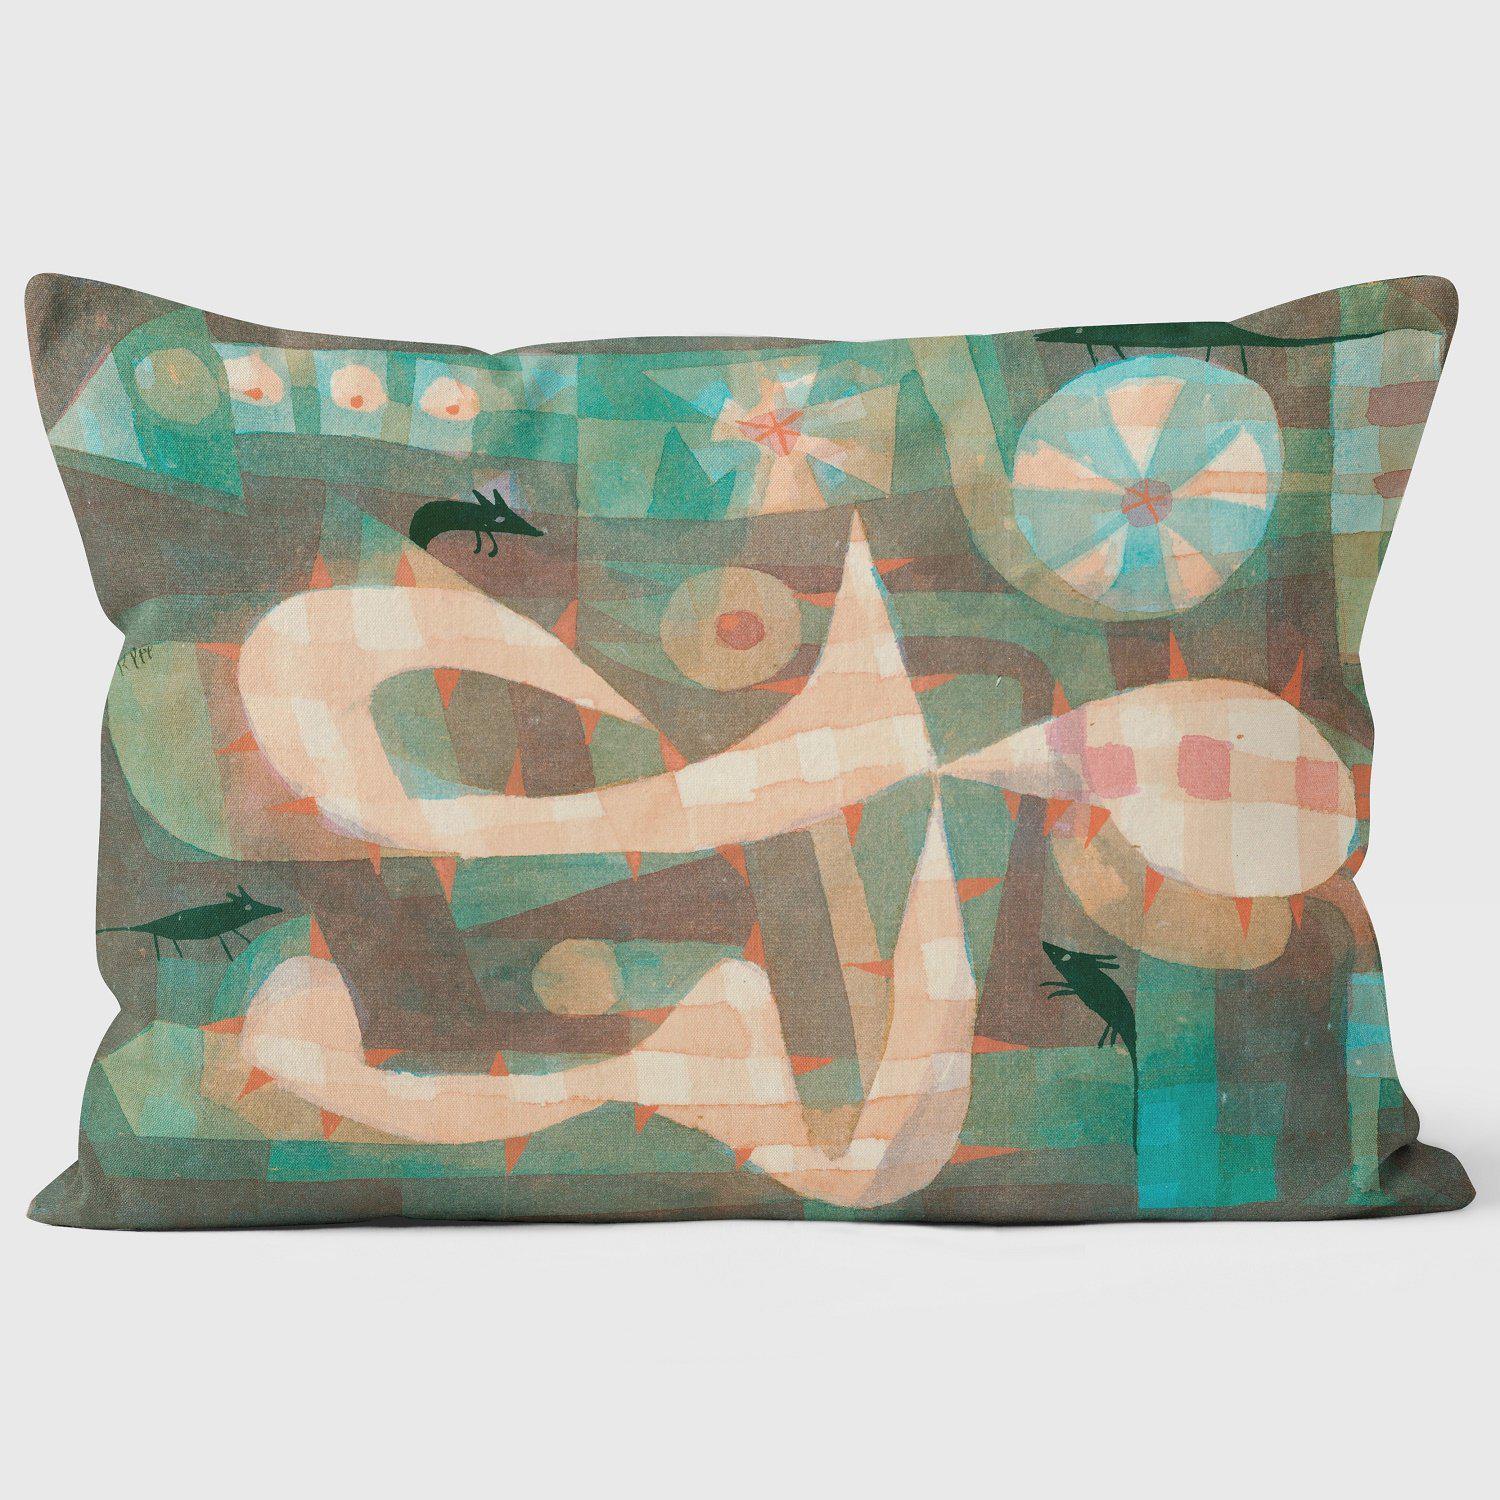 Barbed Noose And Mice - Paul Klee Cushion - Handmade Cushions UK - WeLoveCushions